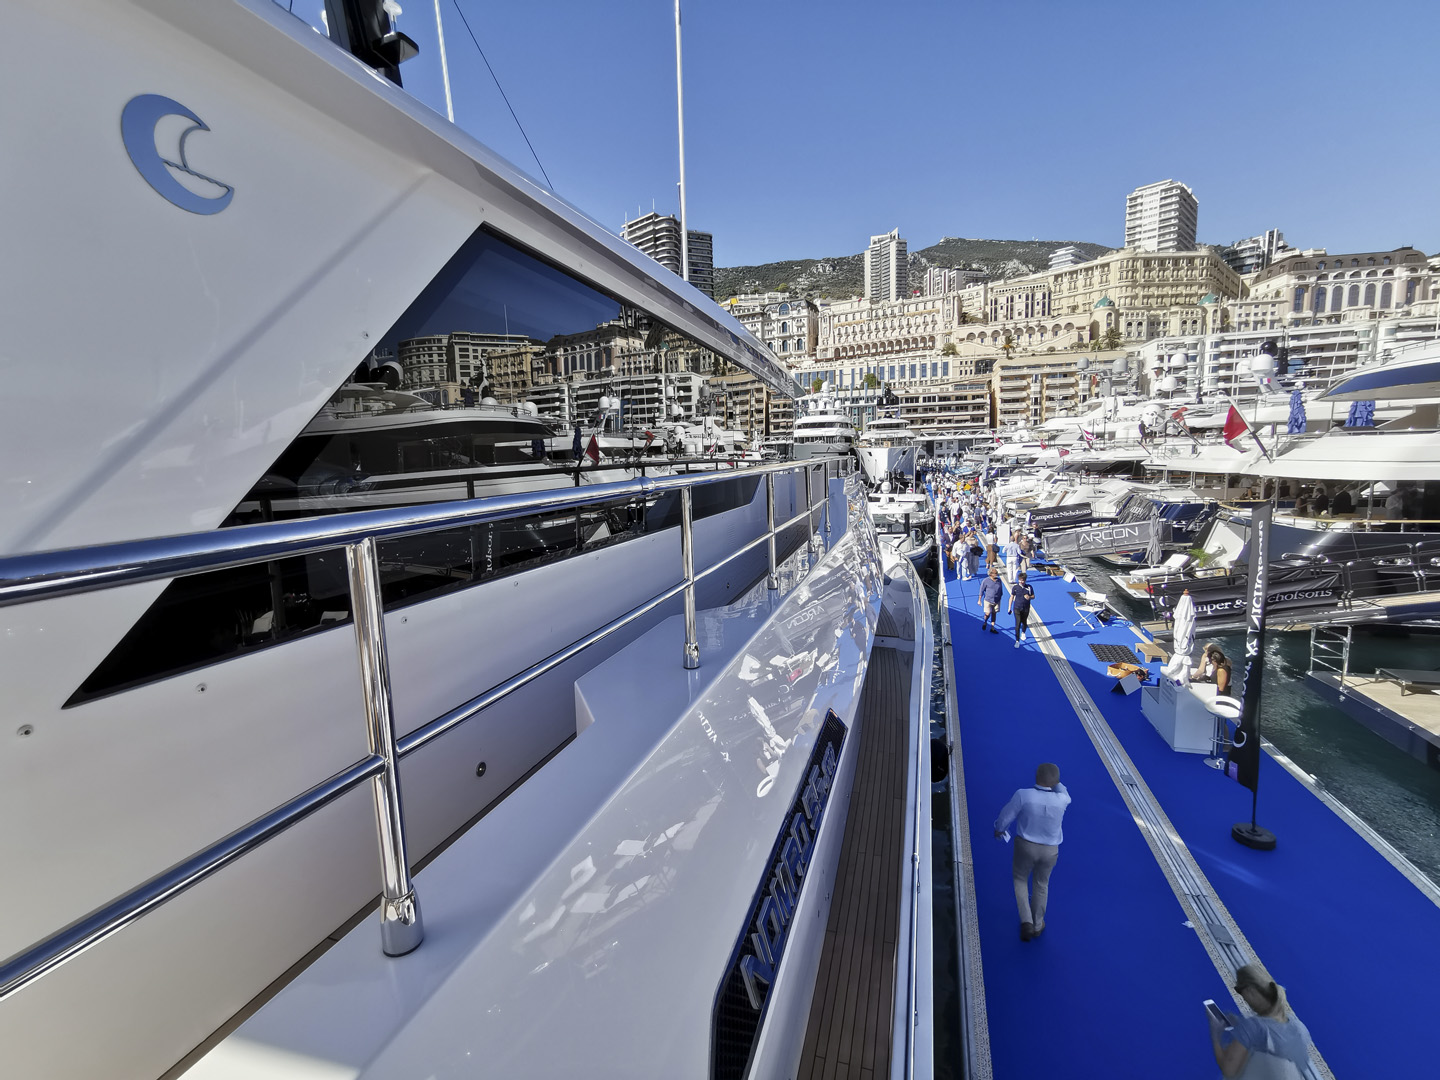 Gulf Craft at the Monaco Yacht Show 2019